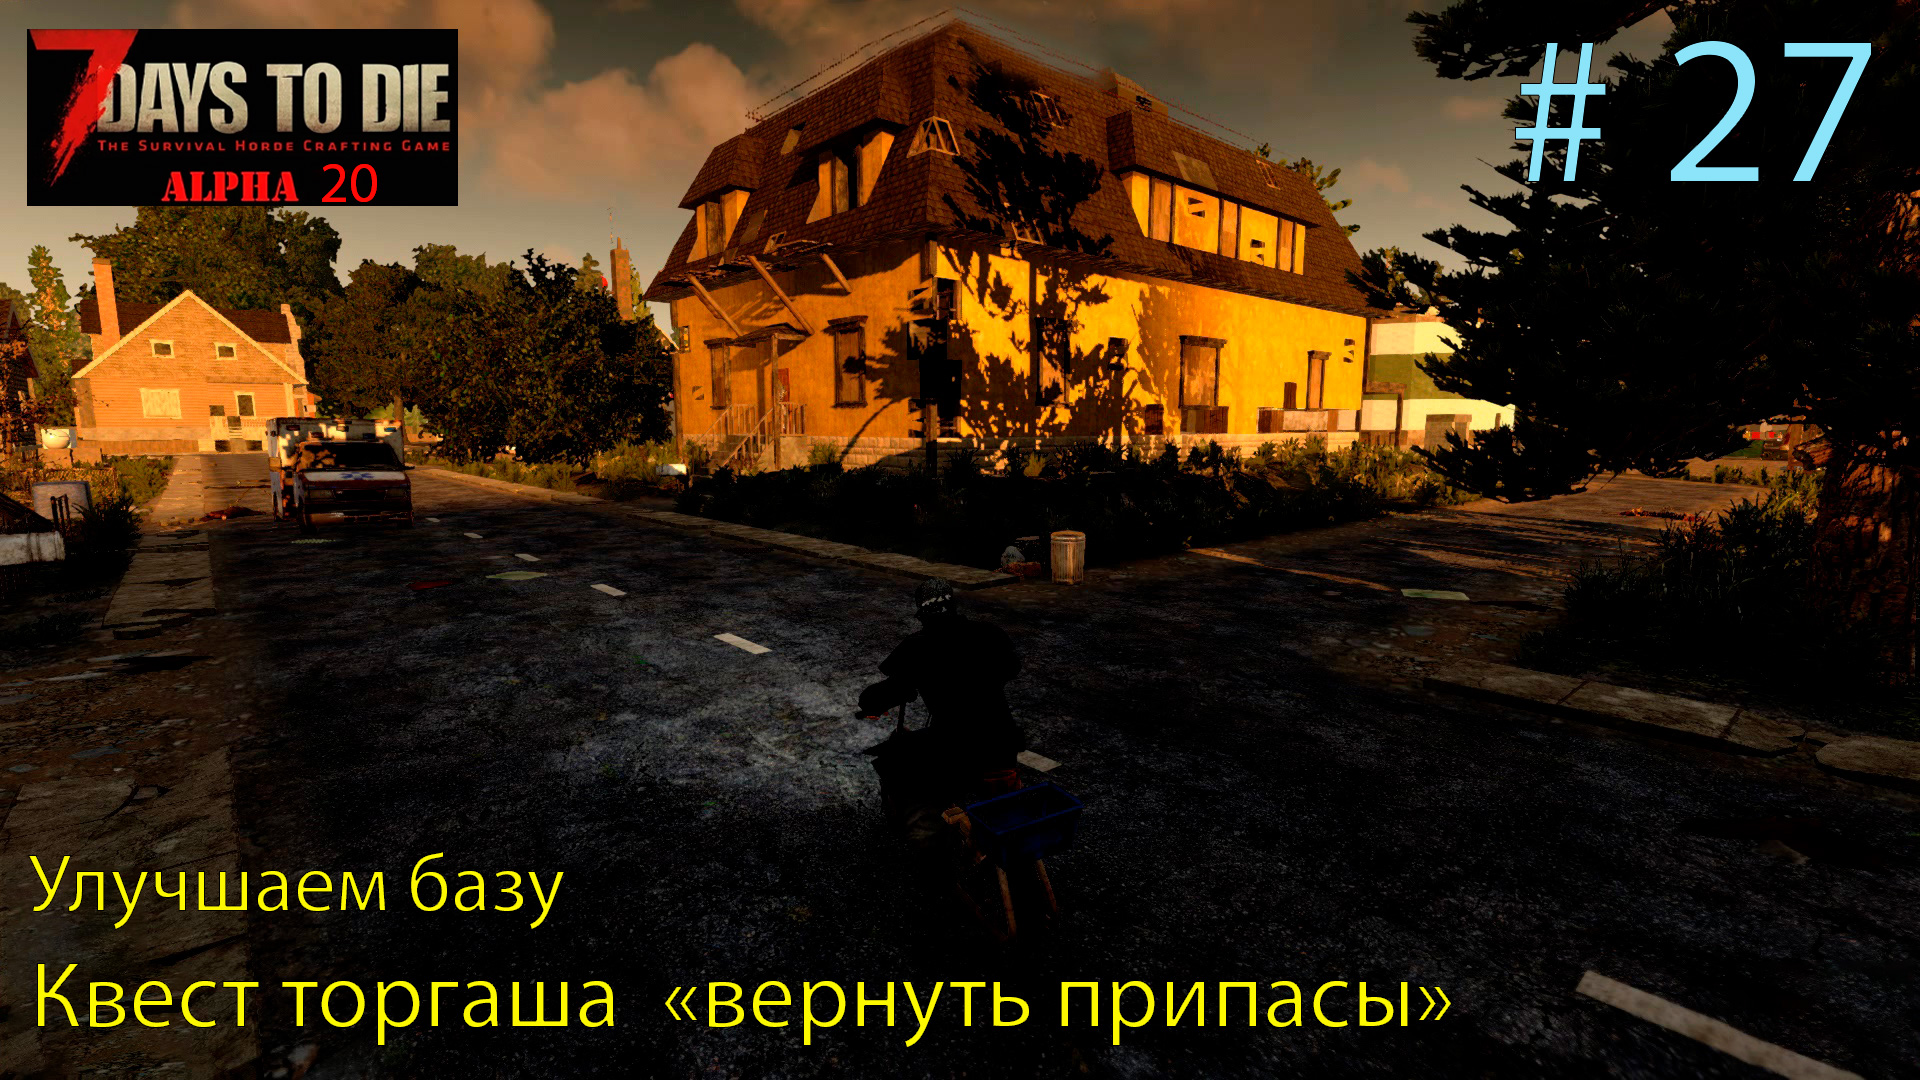 Could not fully initialize steam 7 days to die что делать фото 103